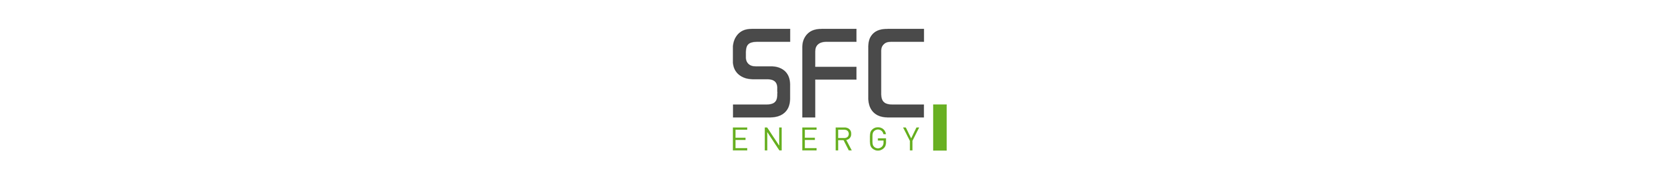 sfc_energy.png